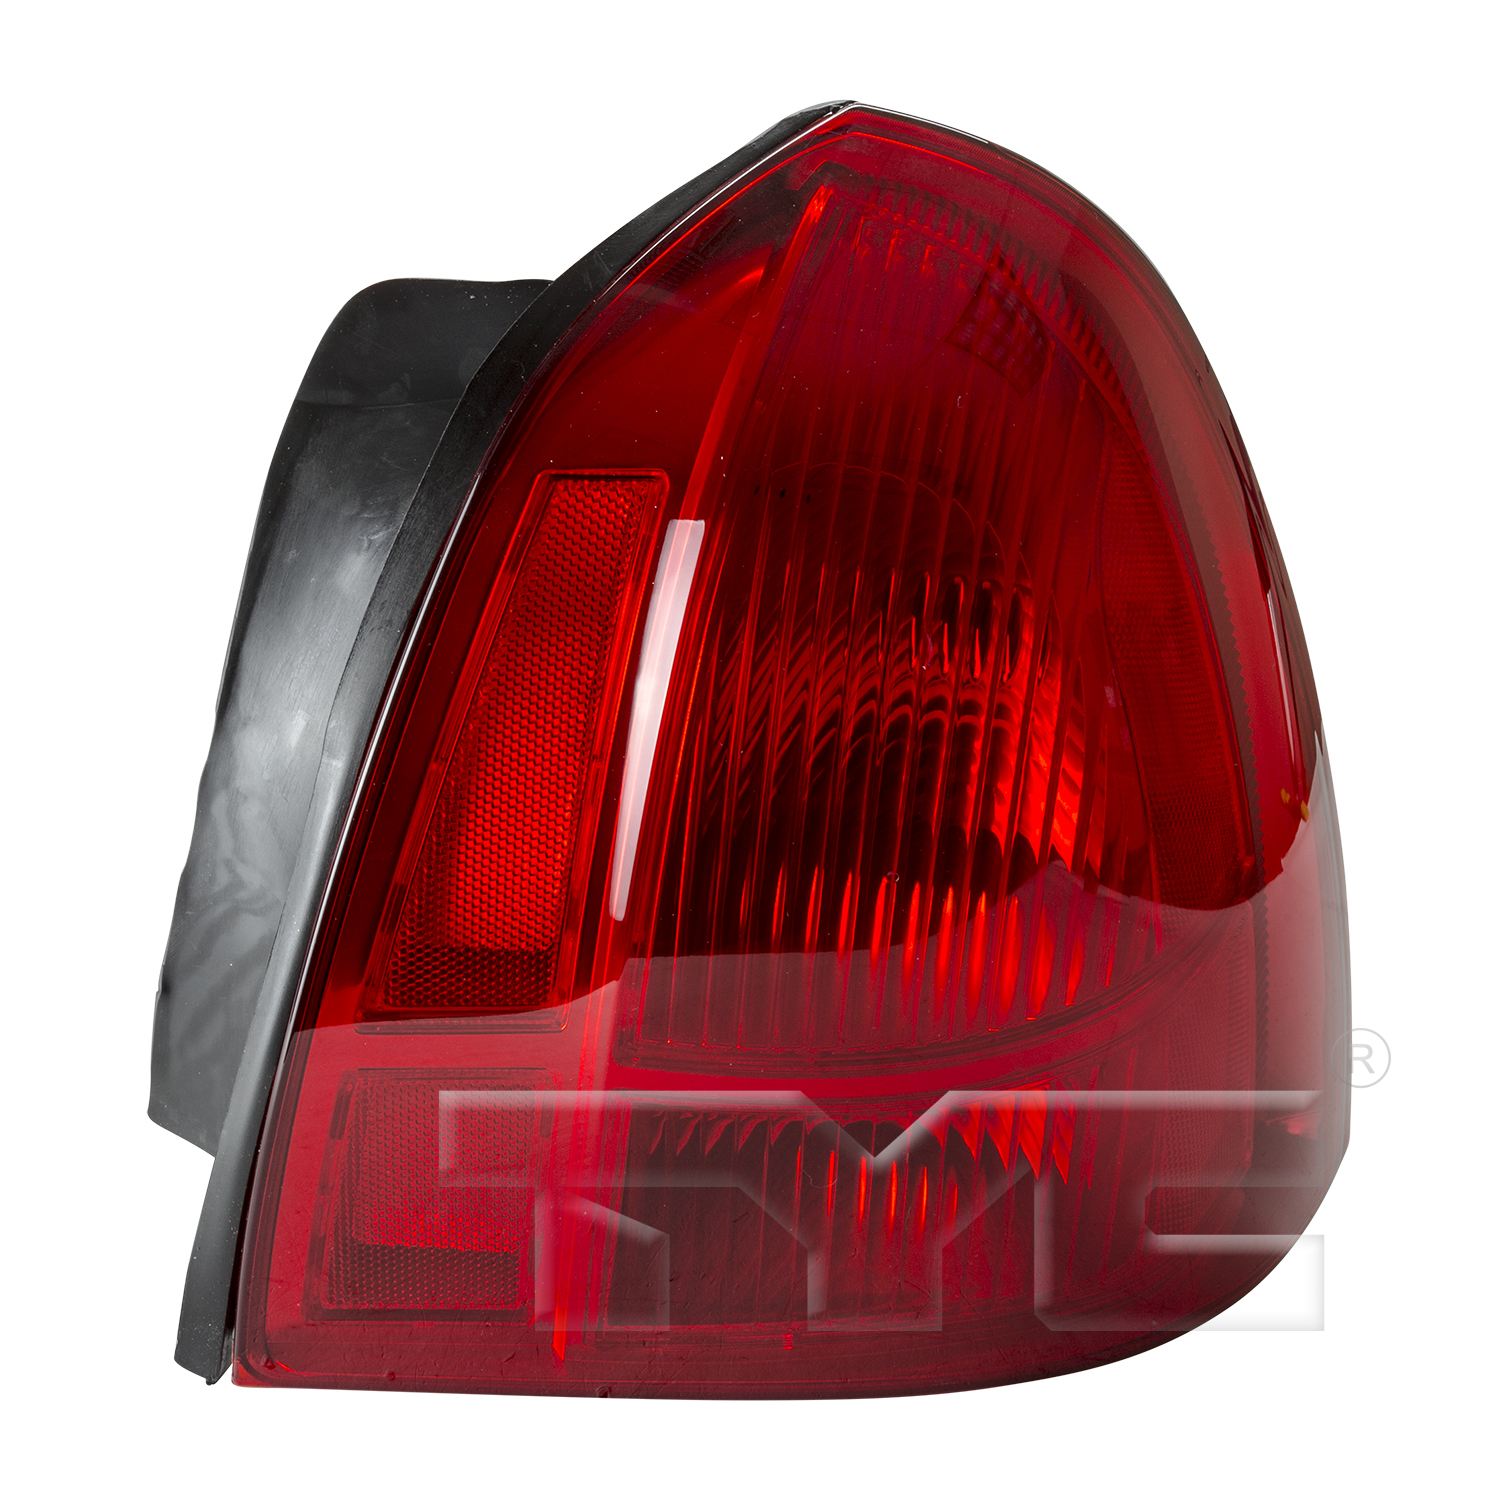 Aftermarket TAILLIGHTS for LINCOLN - TOWN CAR, TOWN CAR,03-05,RT Taillamp assy